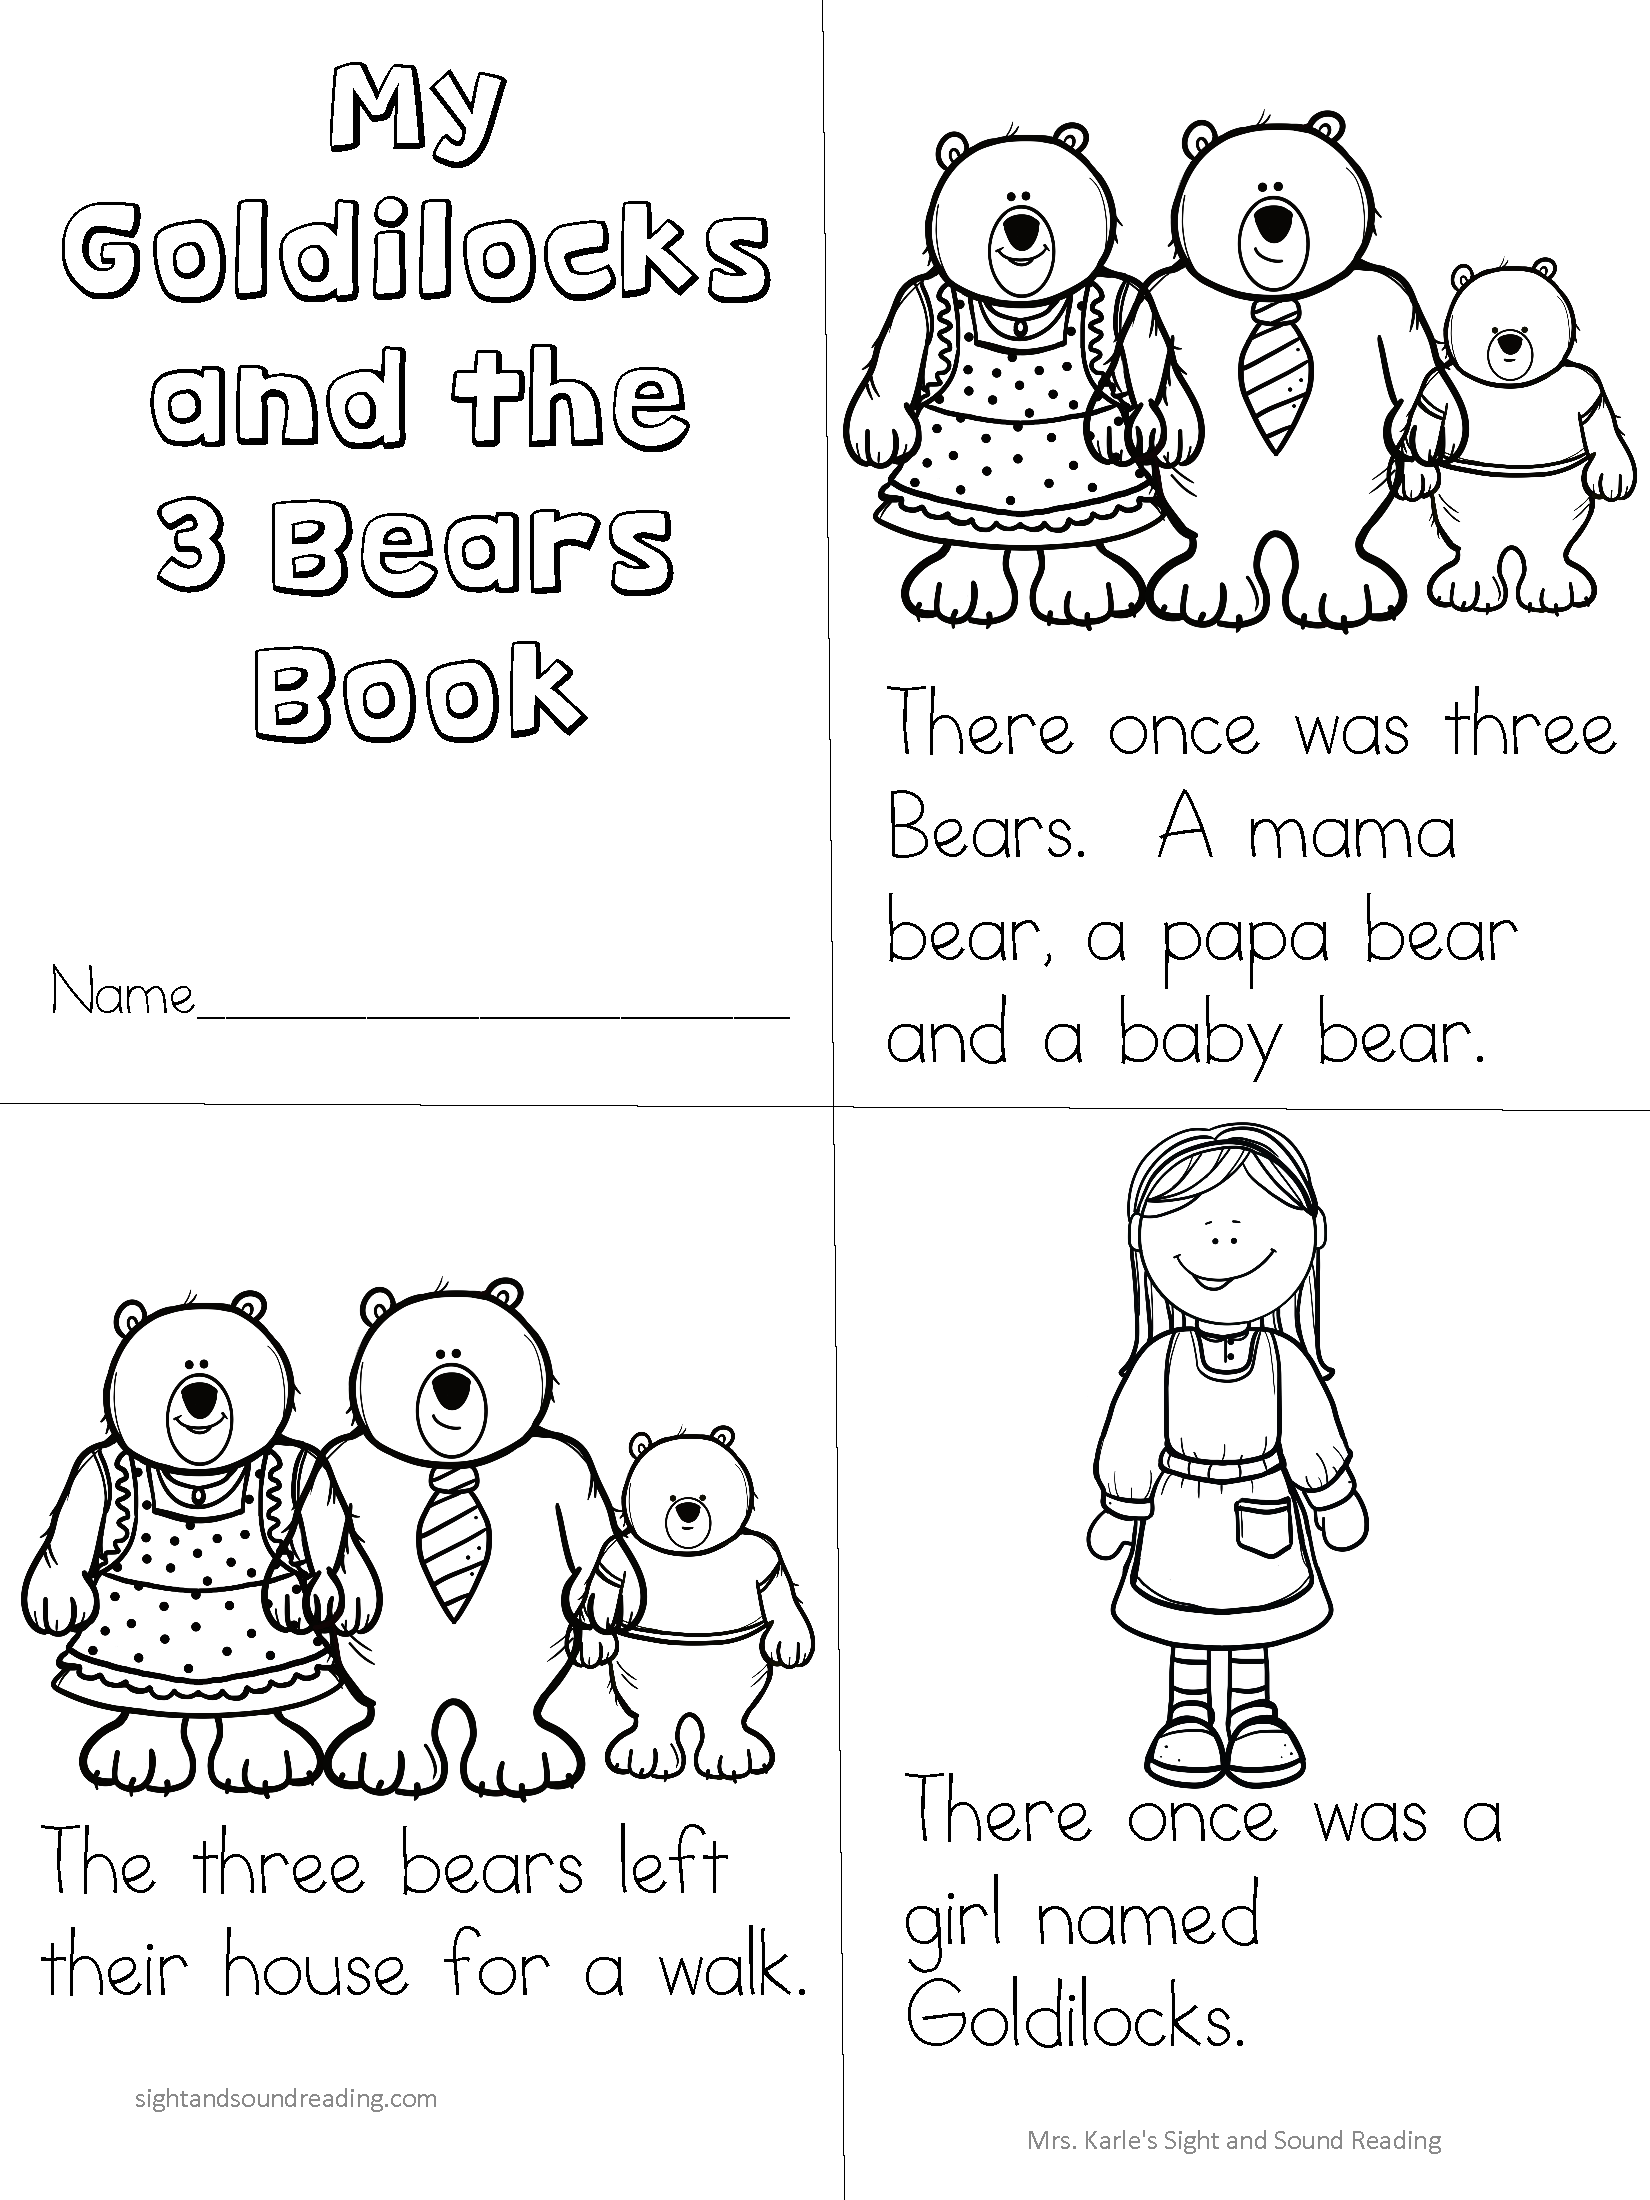 three bears and goldilocks story with pictures